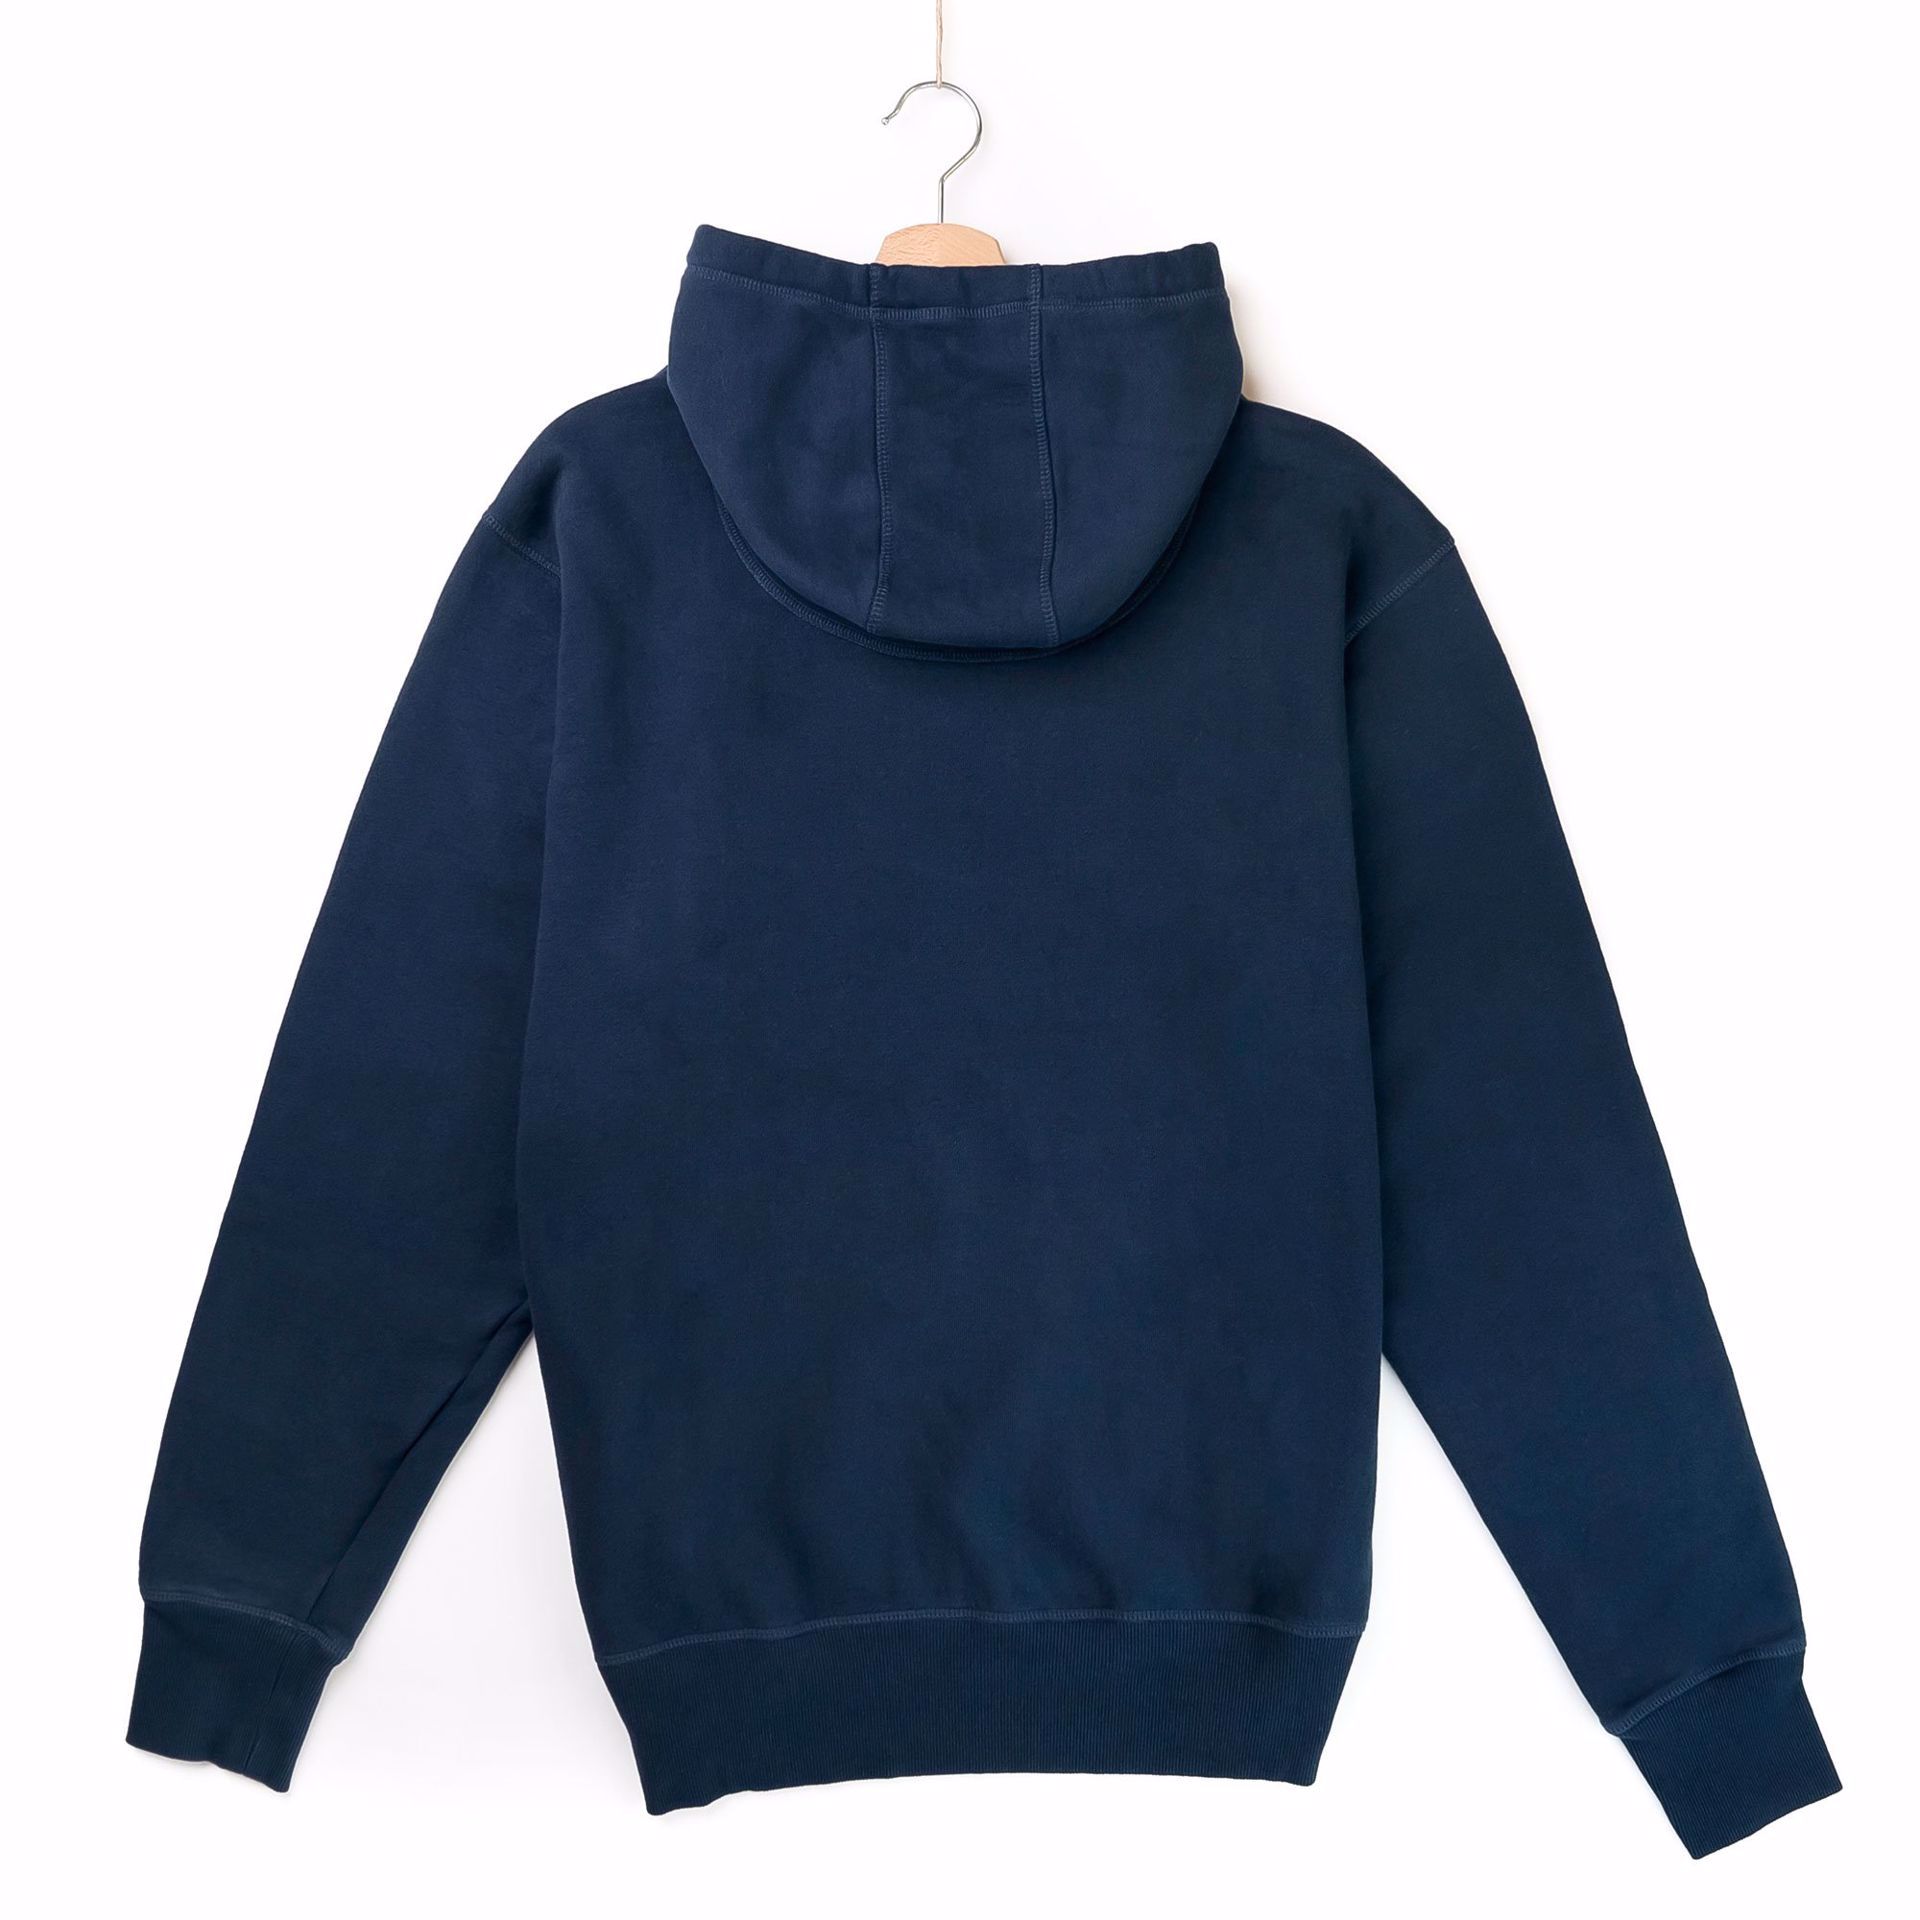 'ORIGINAL CLASSIC' POP HOODIE - NAVY. Outer Reef Surf Store